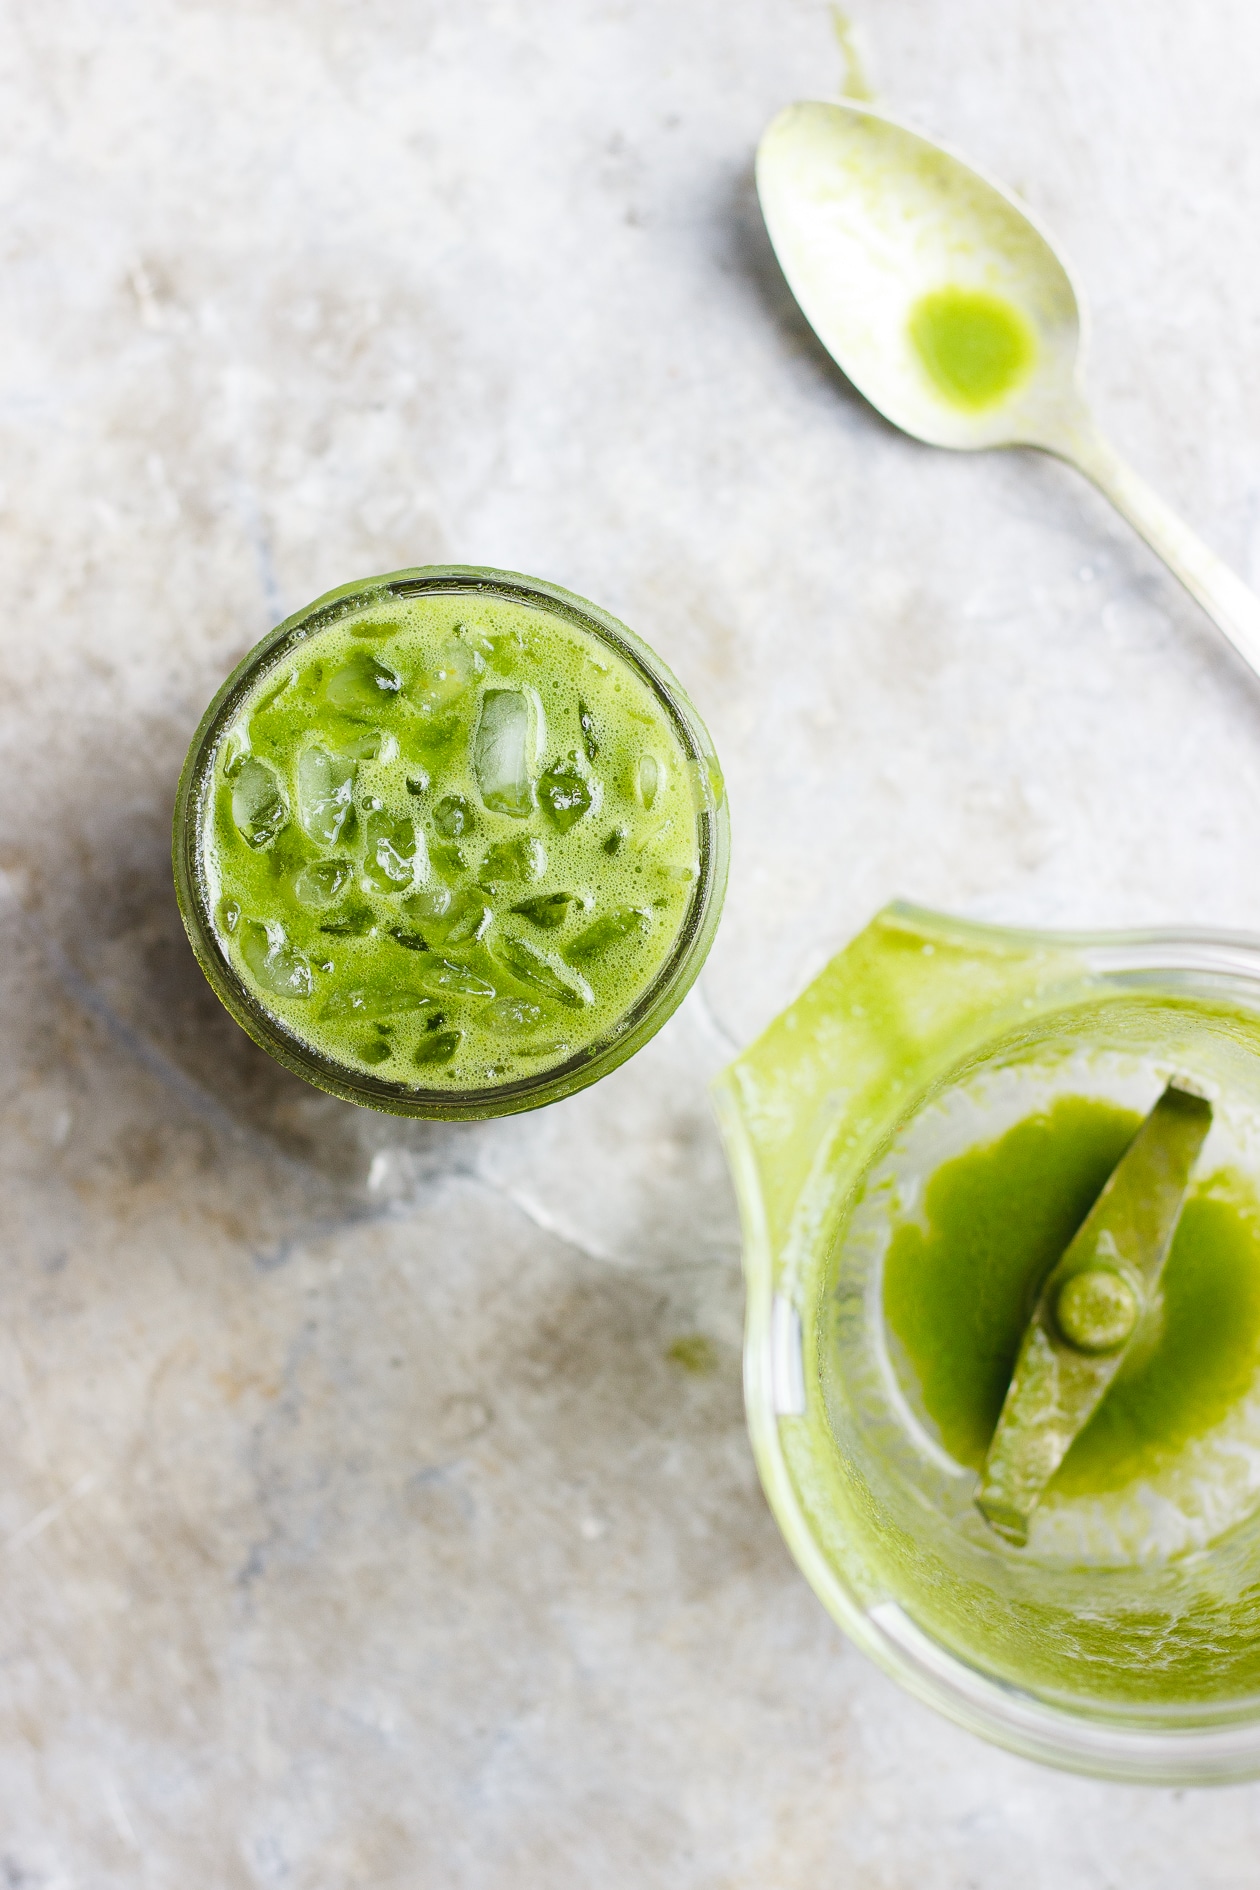 THE PERFECT FALL GREEN SMOOTHIE